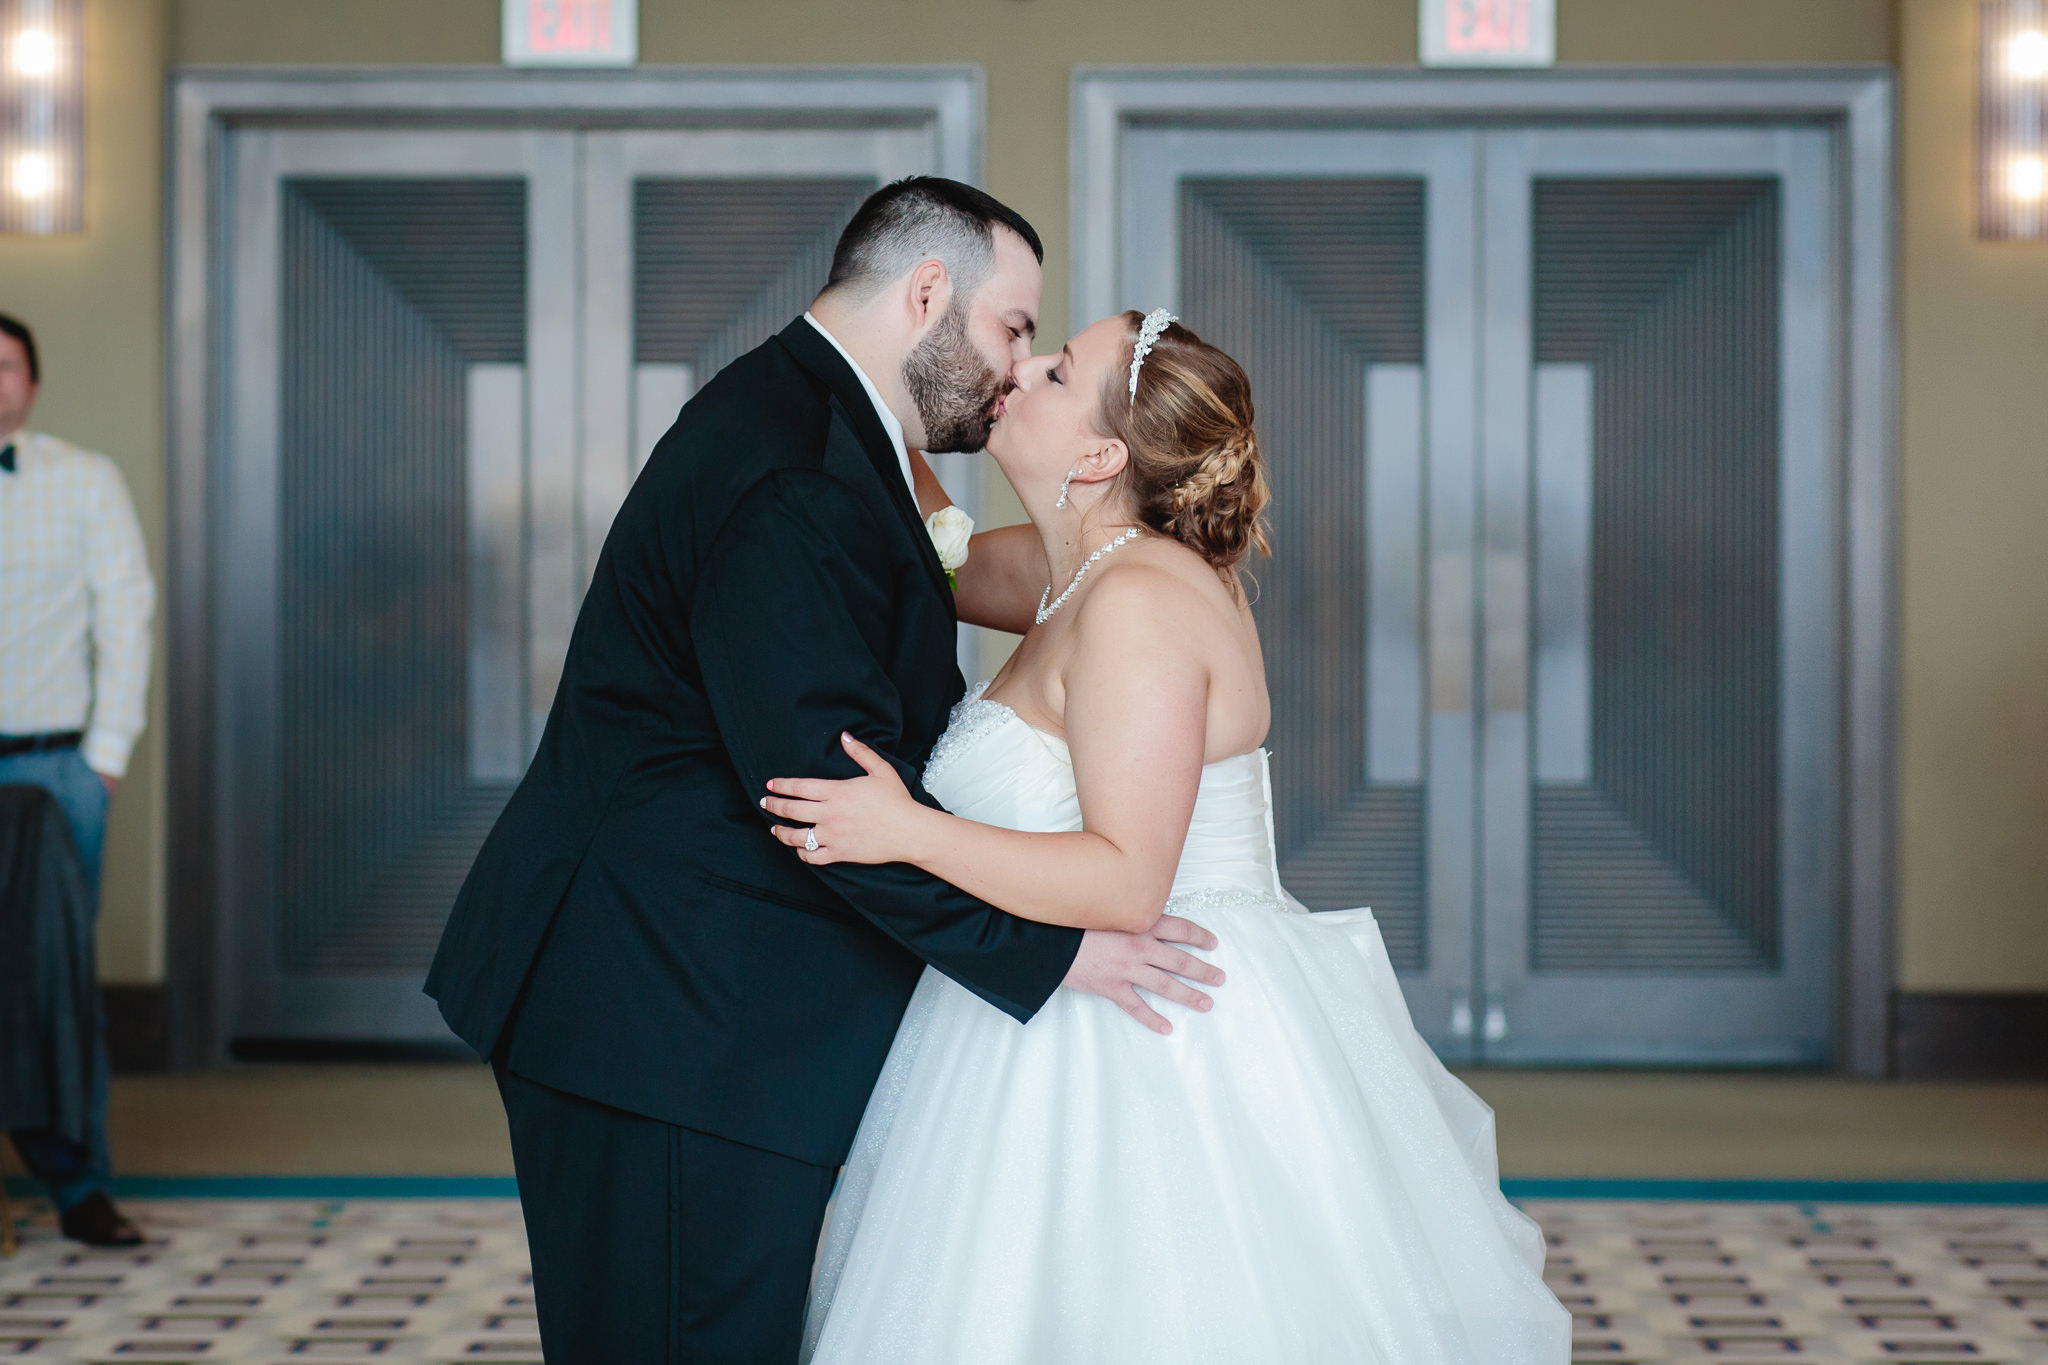 Bride & groom kiss during their first dance at Duquesne University